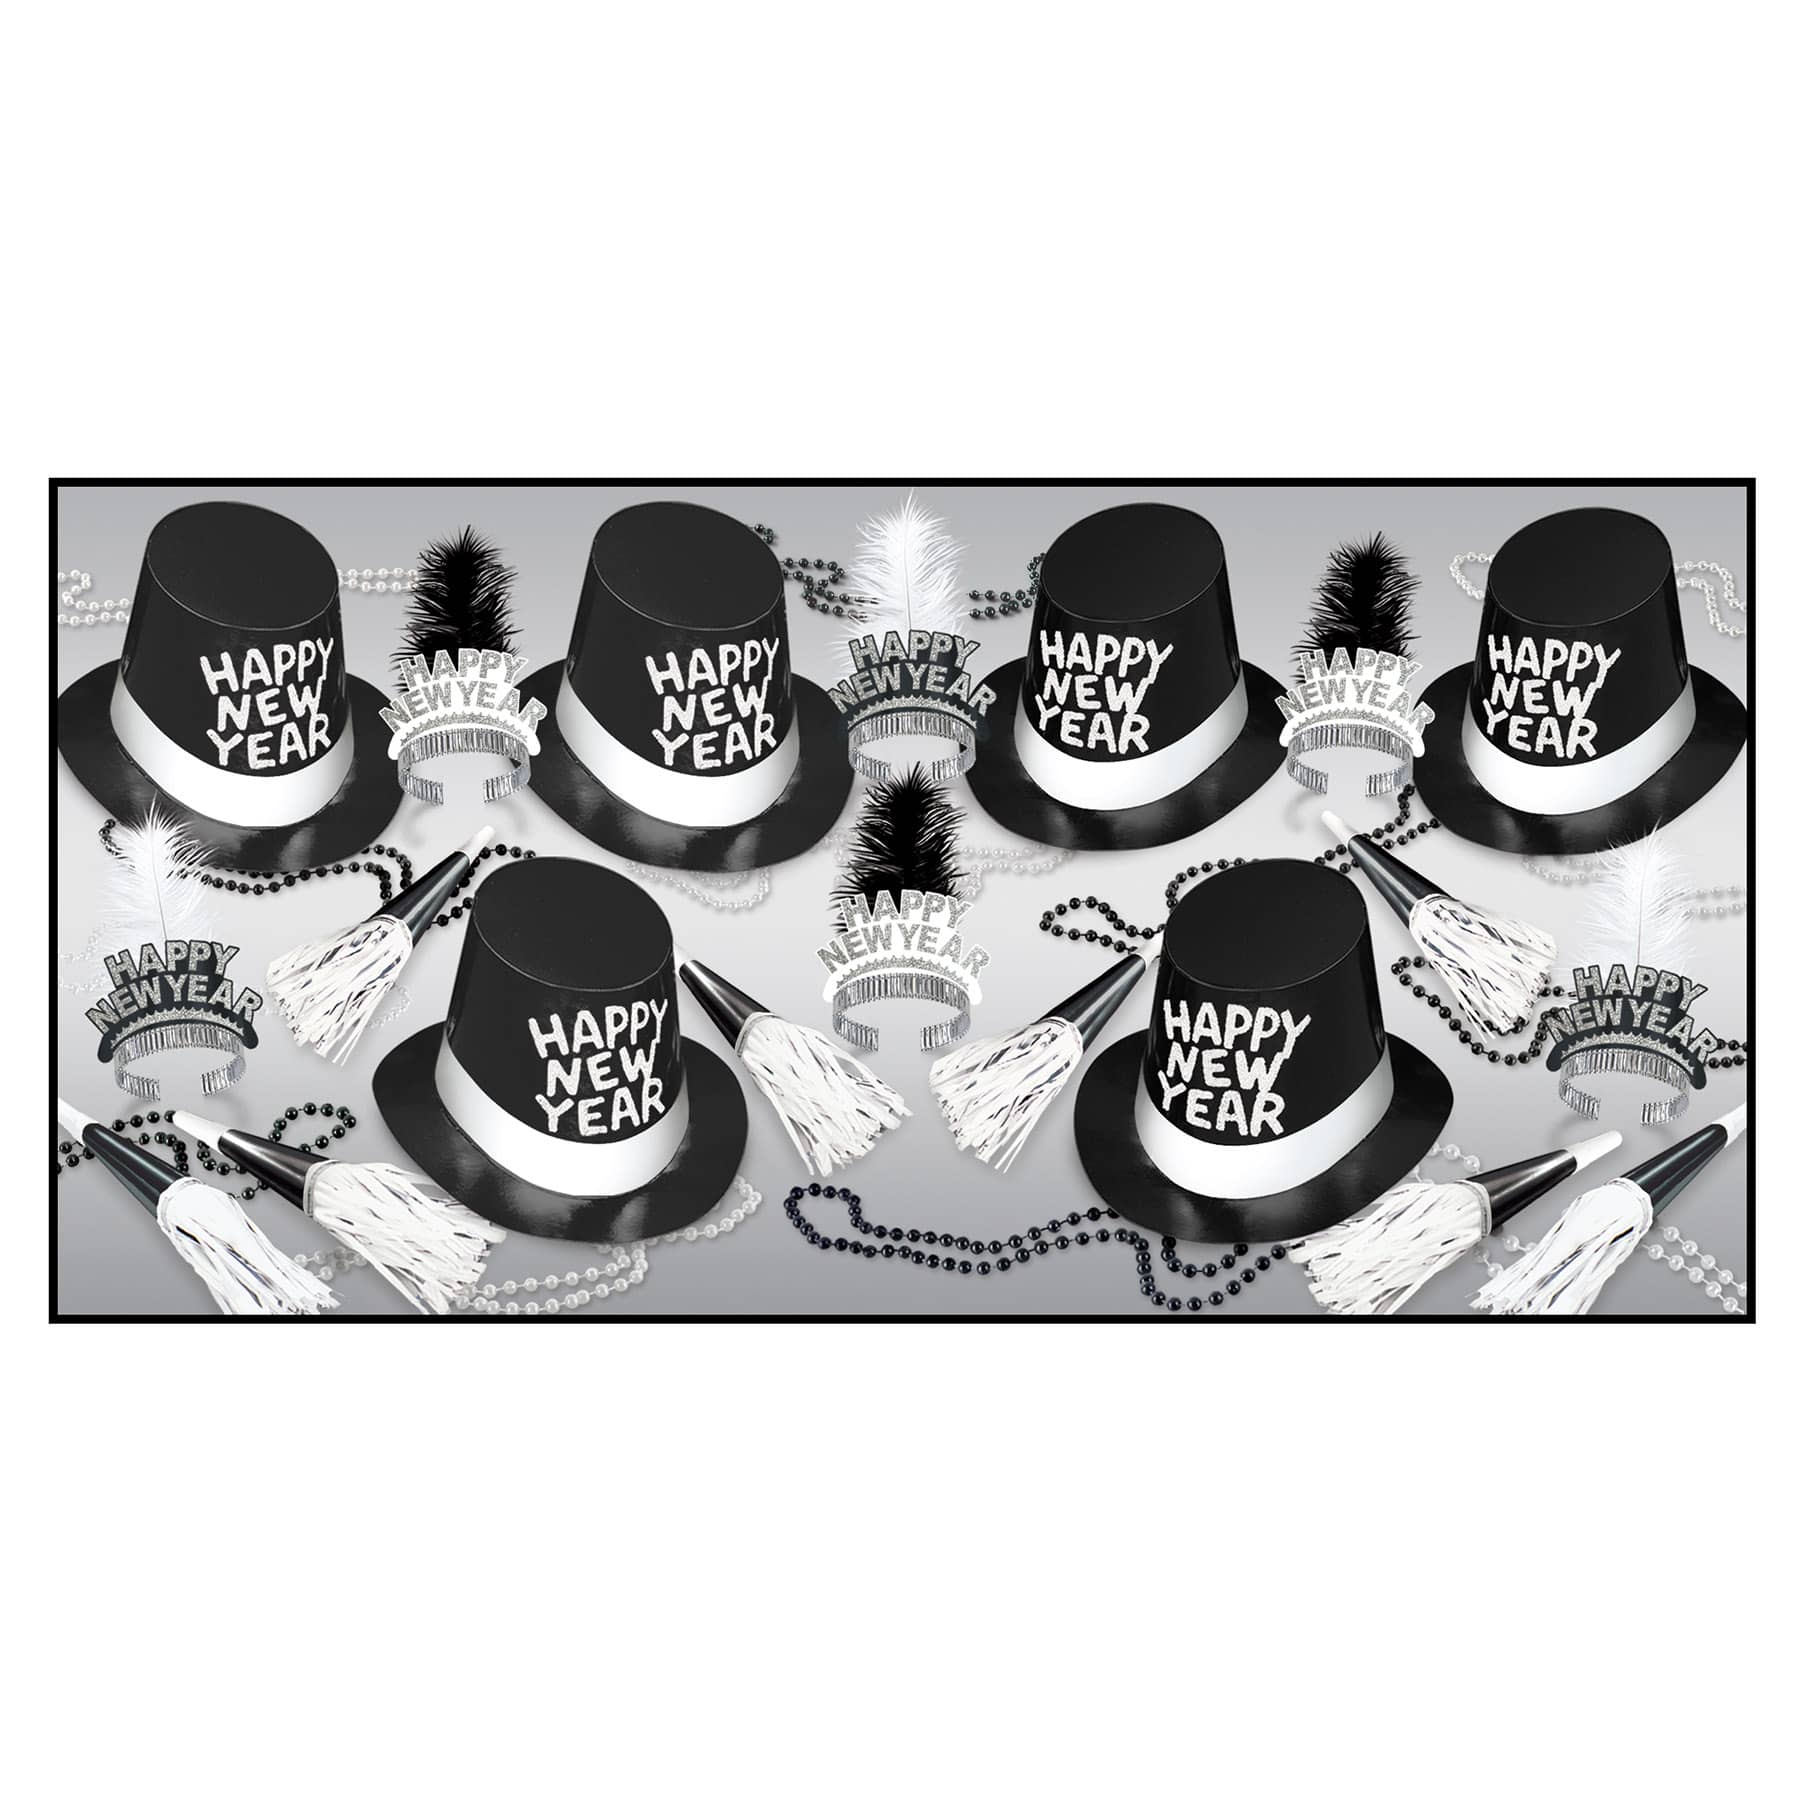 black and white new years assortment that includes wearable items and noisemakers